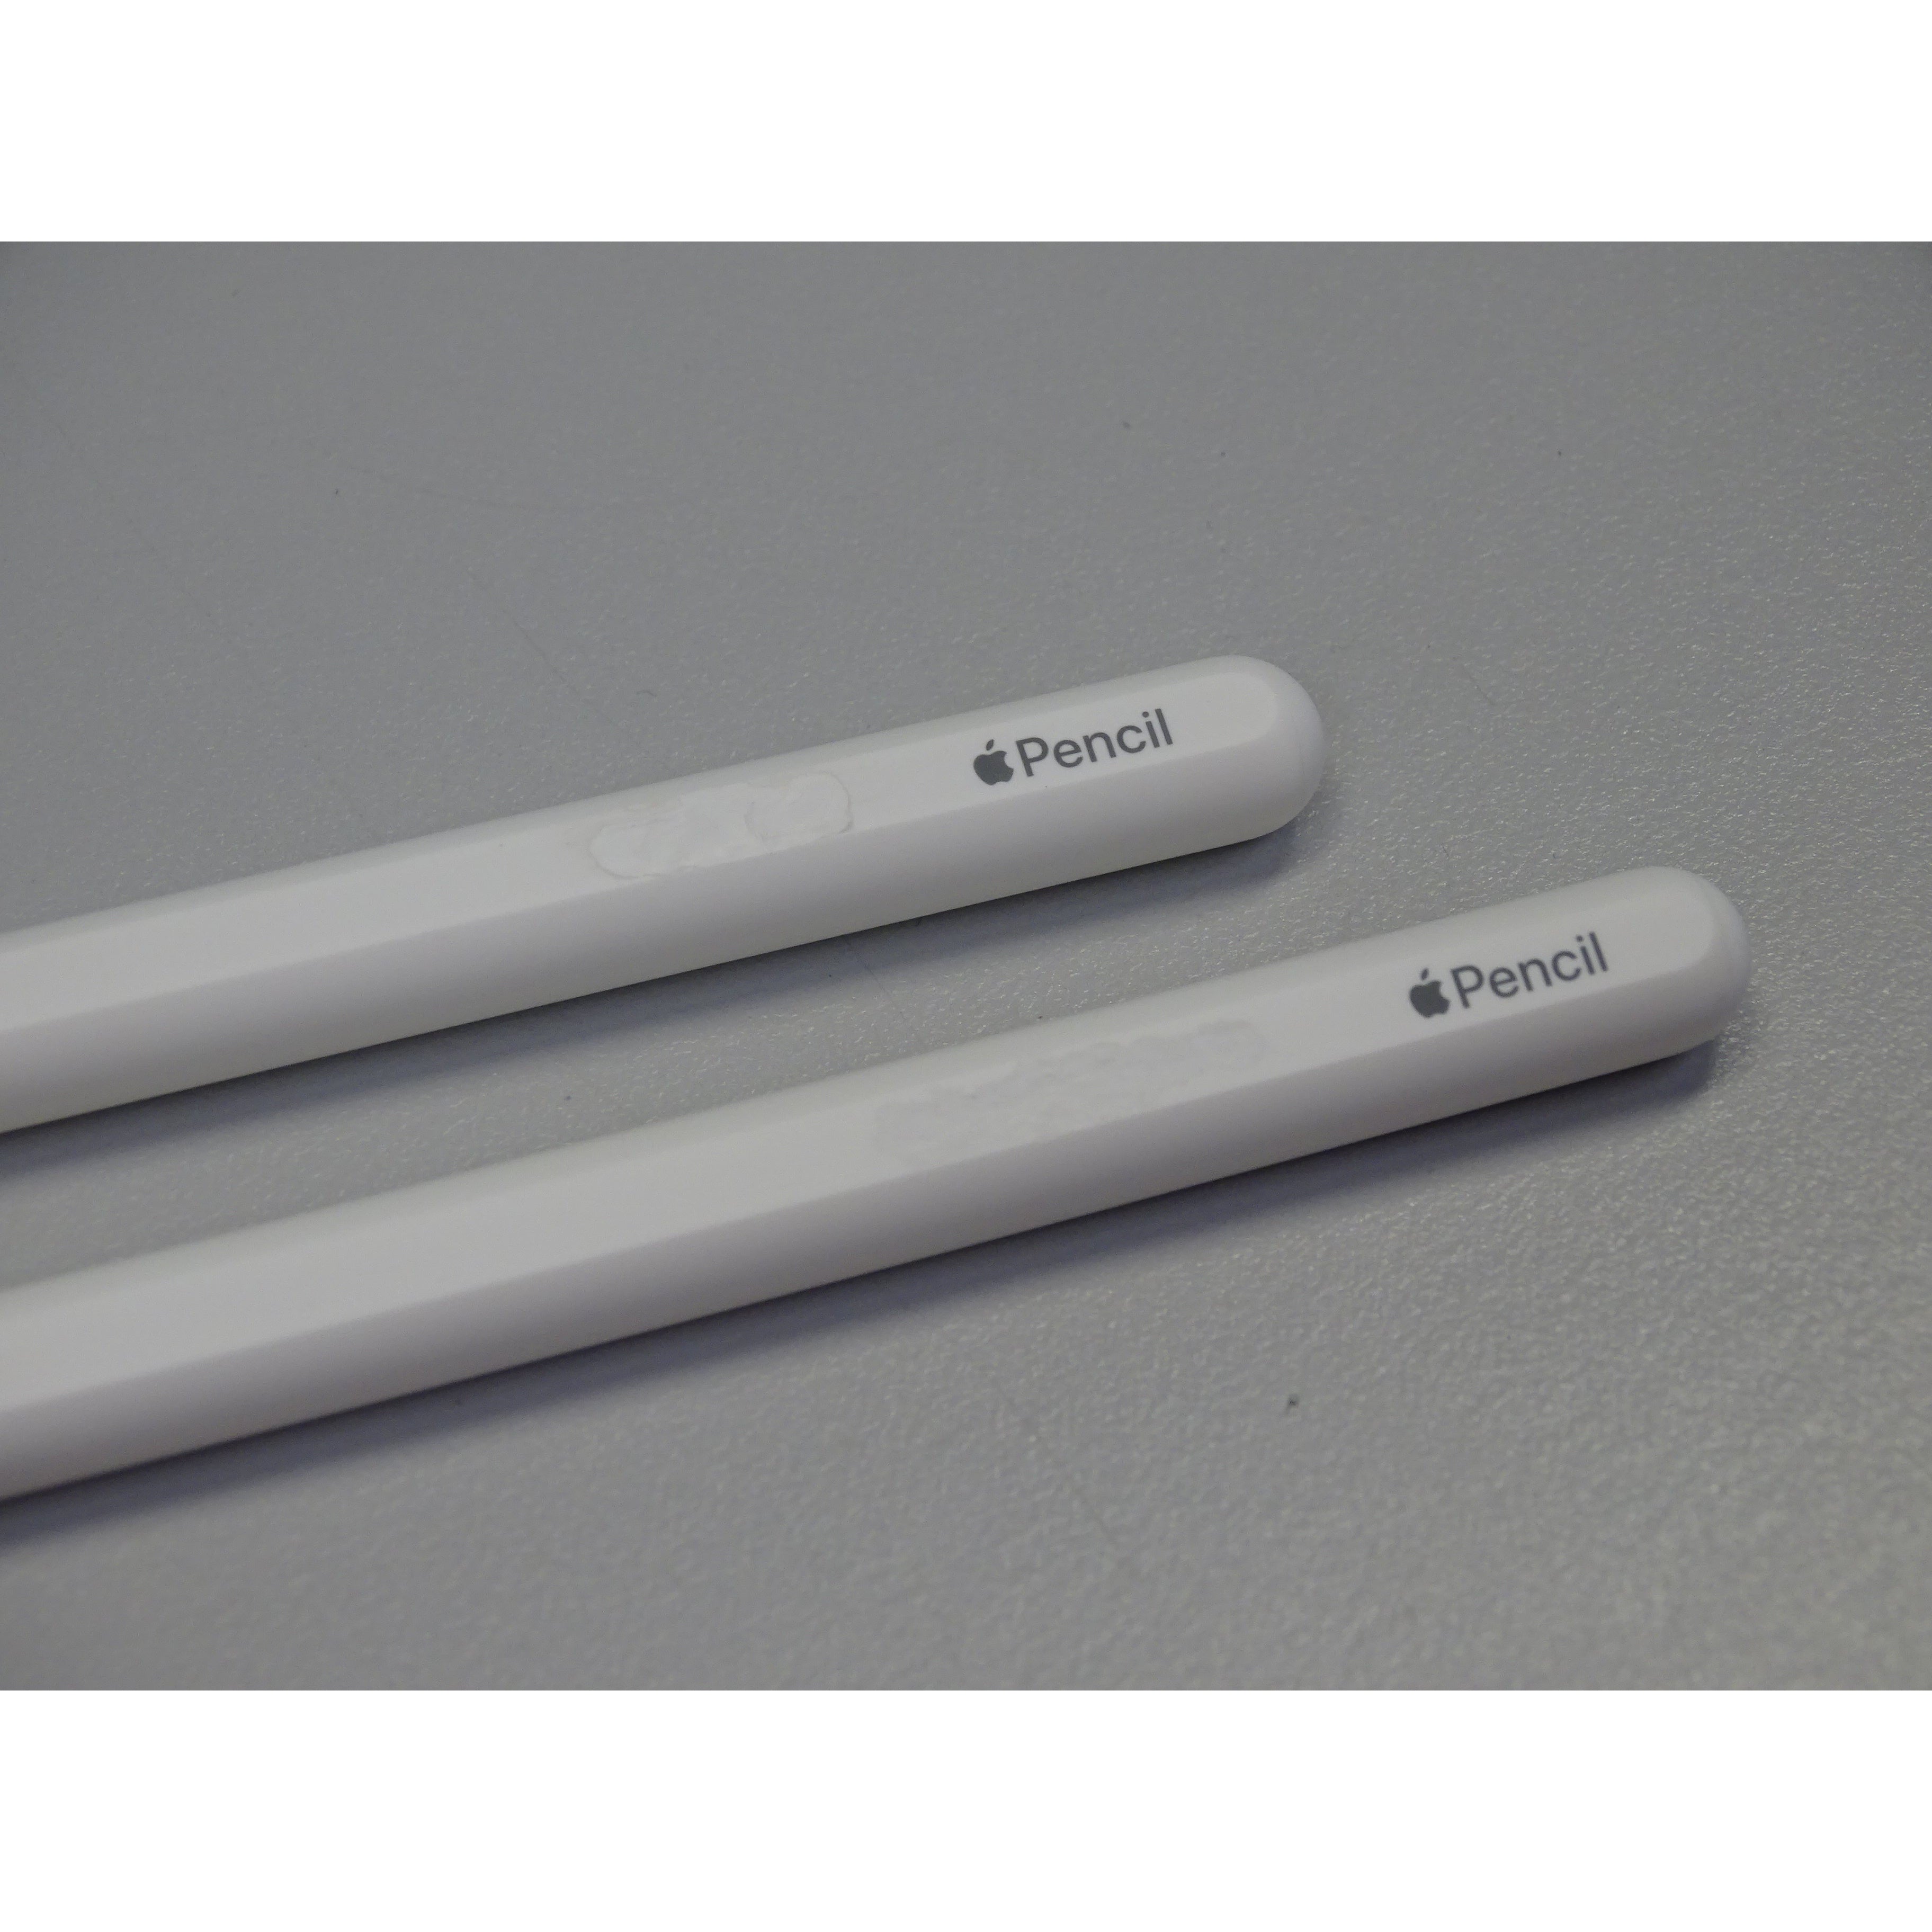 Apple Pencil (2nd Generation), White - Cosmetic Damage